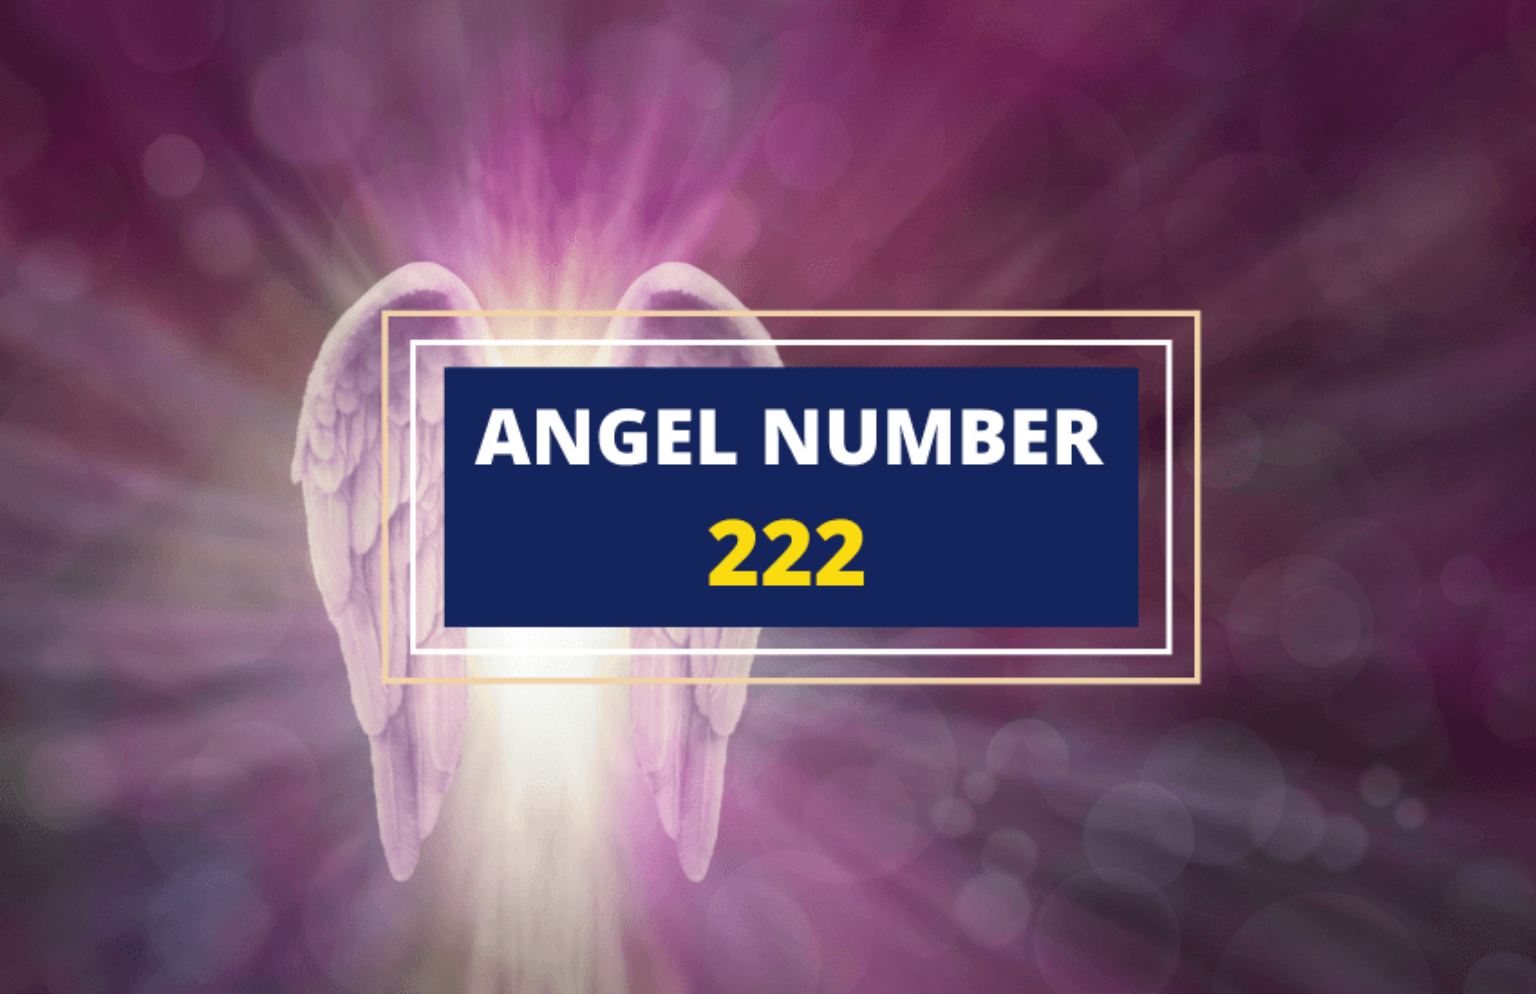 what does the number 222 symbolize